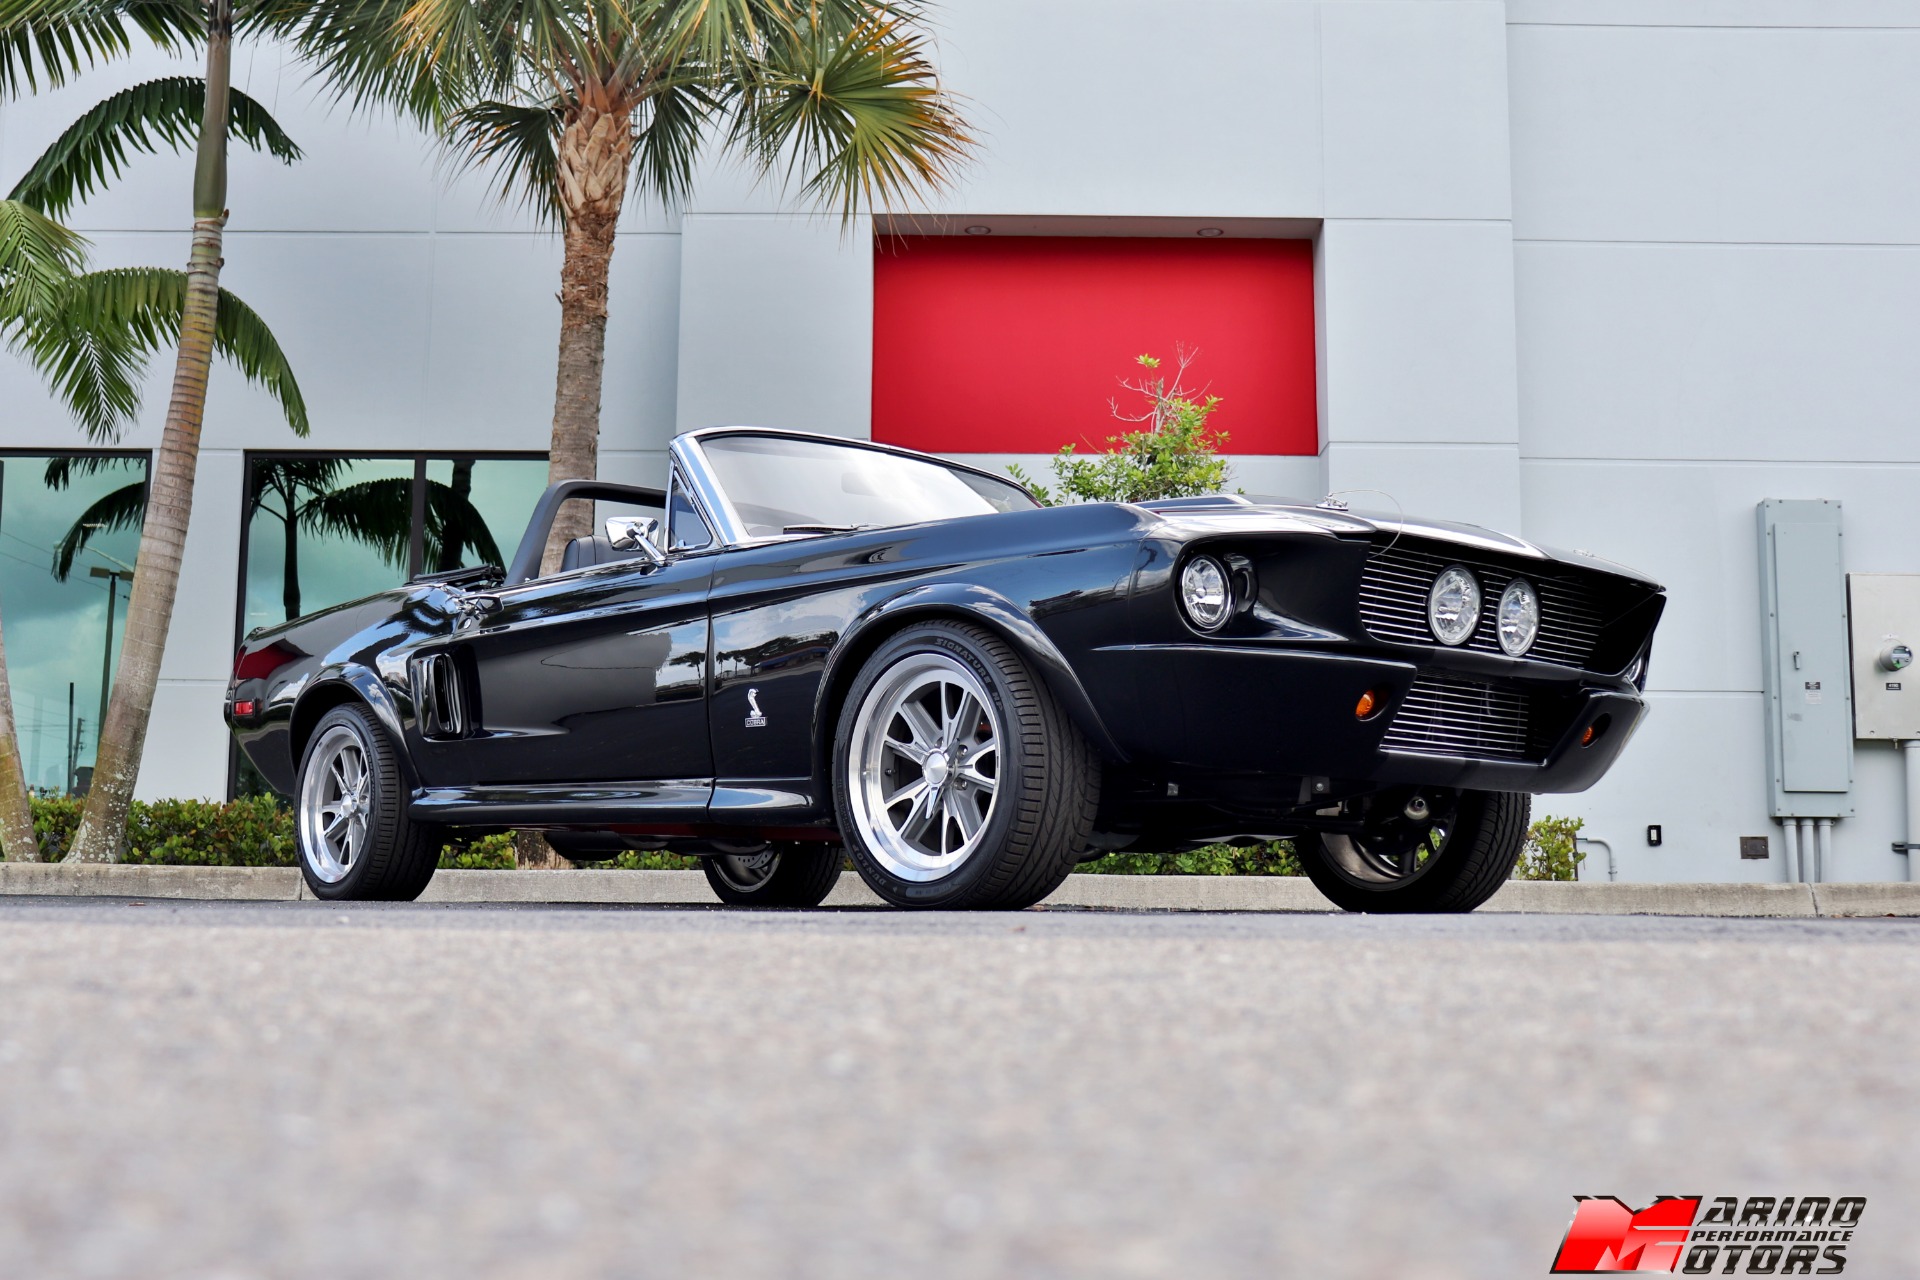 Used-1968-Ford-Mustang-Restomod